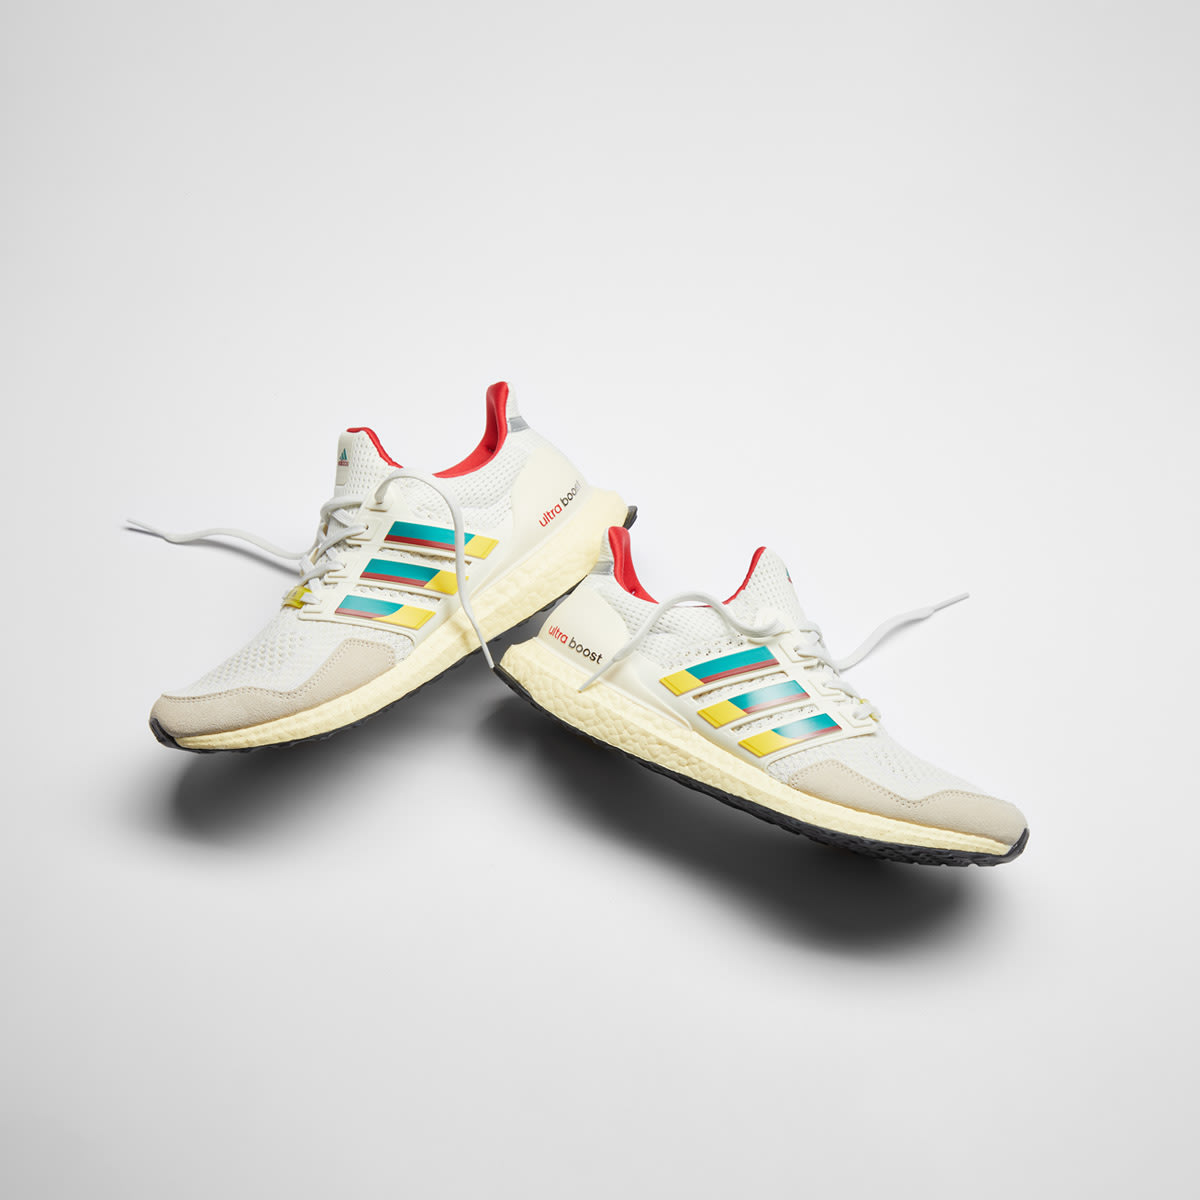 Adidas Ultraboost DNA 1.0 X ZX (White & EQT Green) | END. Launches